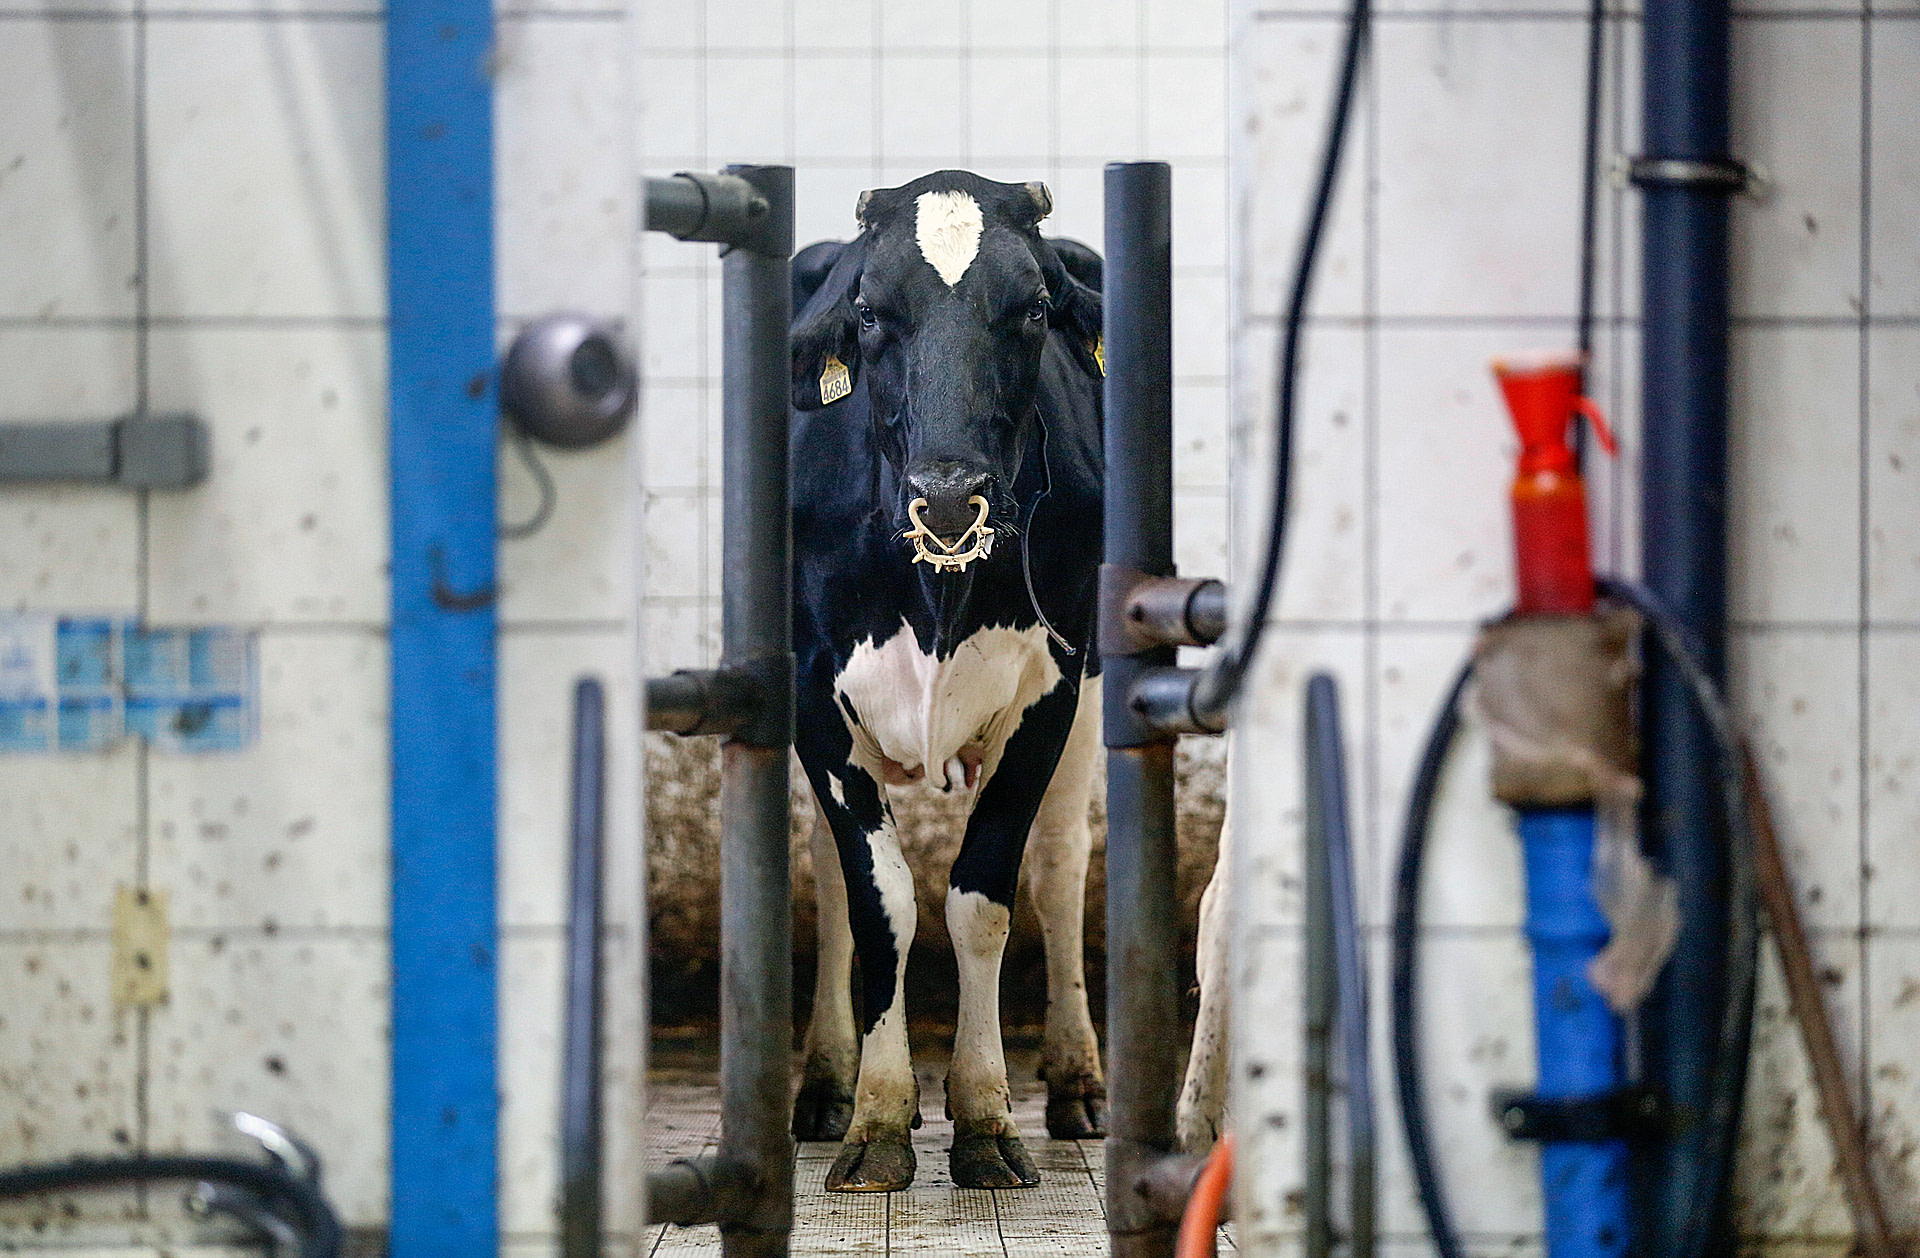 A cow with clipped horns and wearing an anti-suckling spiked nose ring looks through a gap in a wall on a Polish dairy farm. Poland, 2017. Andrew Skowron / We Animals Media